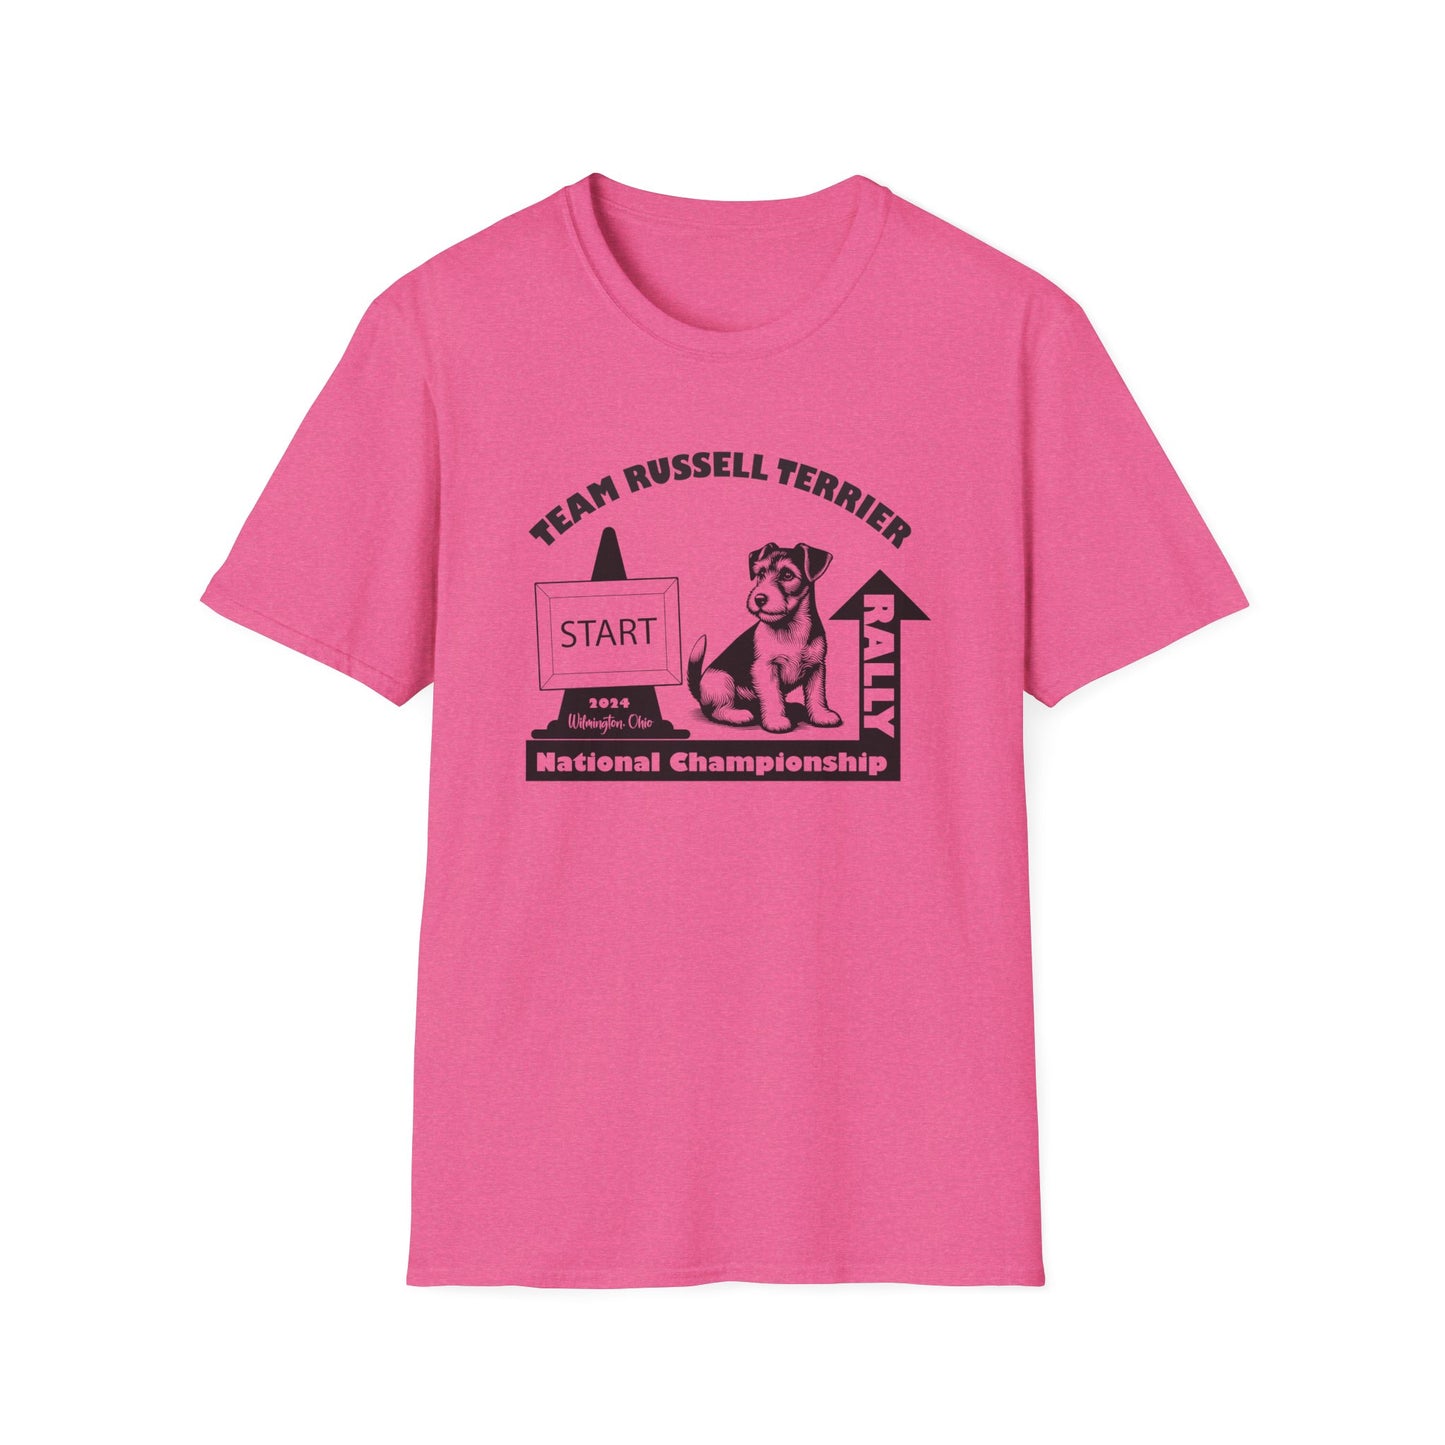 2 RALLY NATIONALS - Jack Russell -  Unisex Softstyle T-Shirt